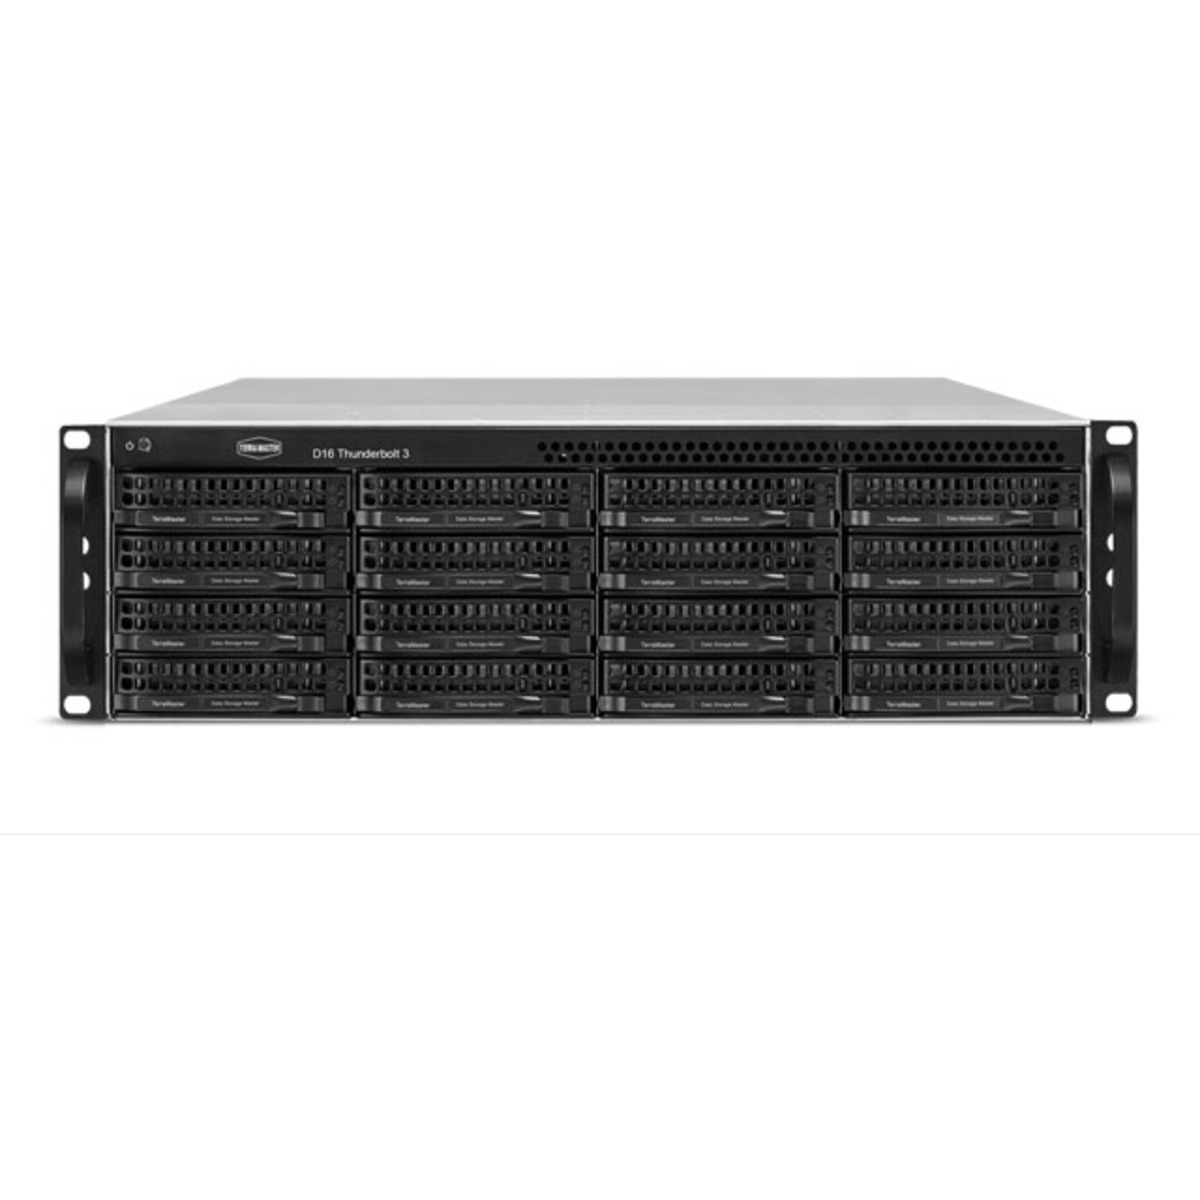 TerraMaster D16 Thunderbolt 3 156tb 16-Bay RackMount Multimedia / Power User / Business DAS - Direct Attached Storage Device 13x12tb Western Digital Red Pro WD121KFBX 3.5 7200rpm SATA 6Gb/s HDD NAS Class Drives Installed - Burn-In Tested D16 Thunderbolt 3